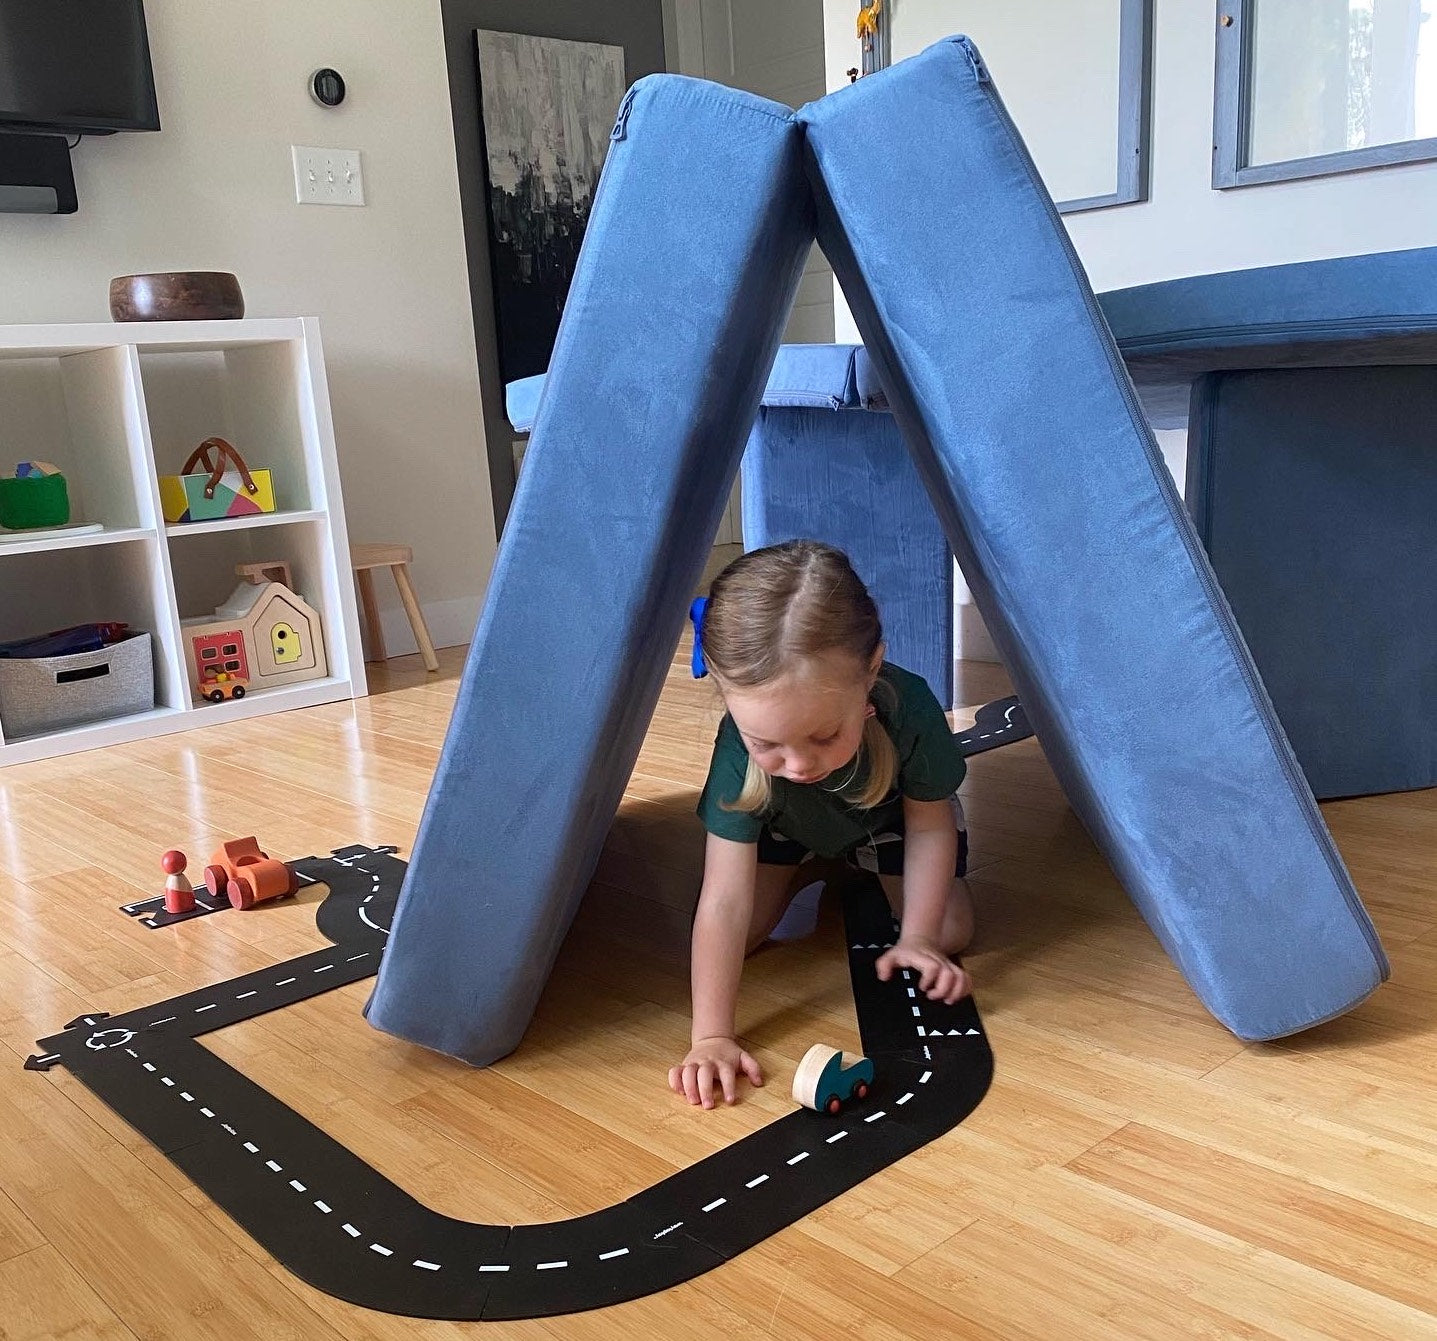 Nugget Obstacle Course Ideas  Single nugget couch configurations, 1 nugget  couch ideas, Kids couch